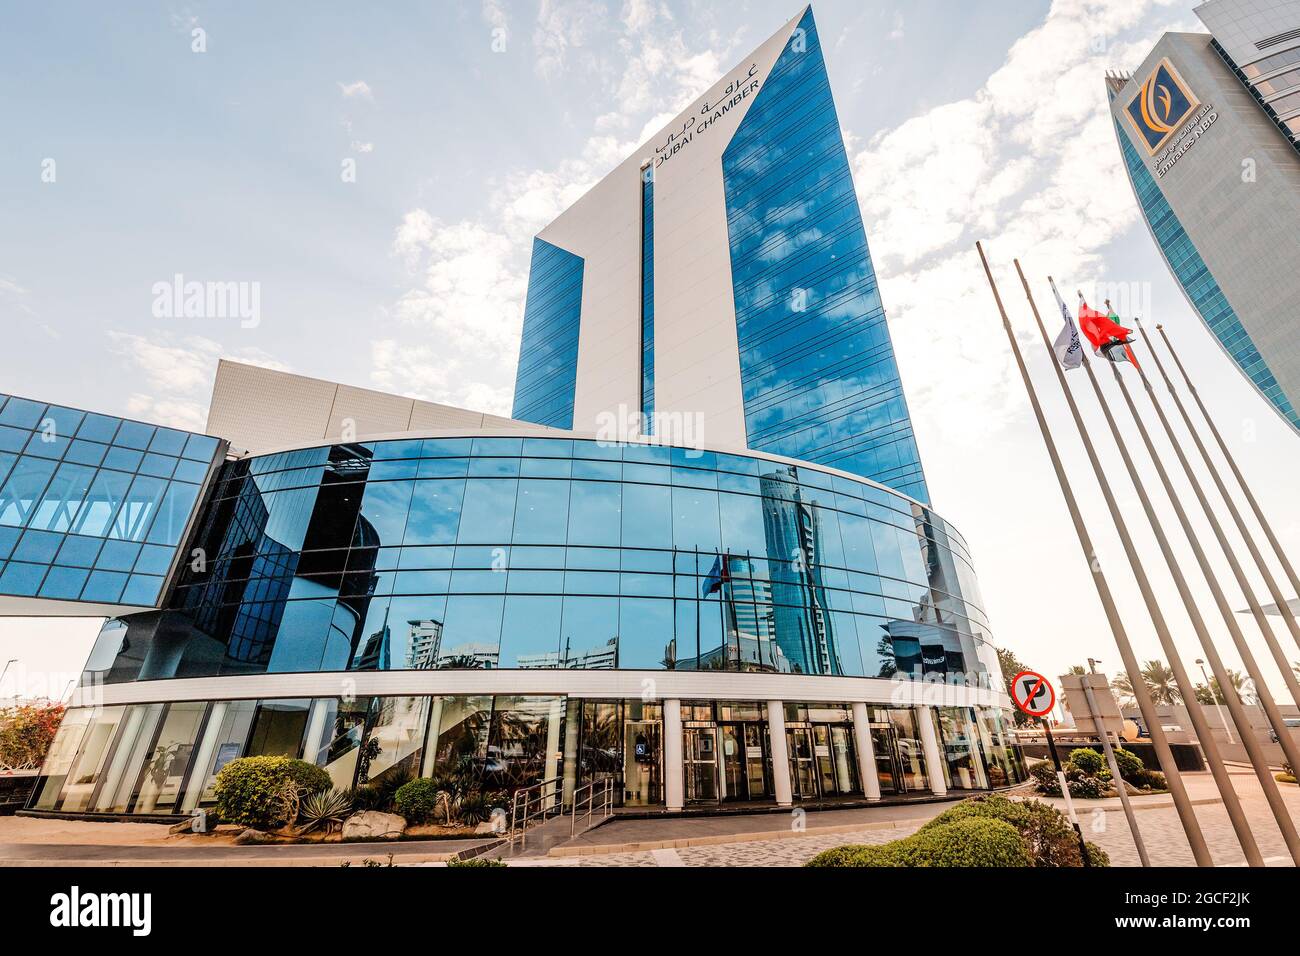 23 February 2021, Dubai, UAE: Dubai Chamber of Commerce and Industry - organization dedicated to supporting and developing the business community Stock Photo